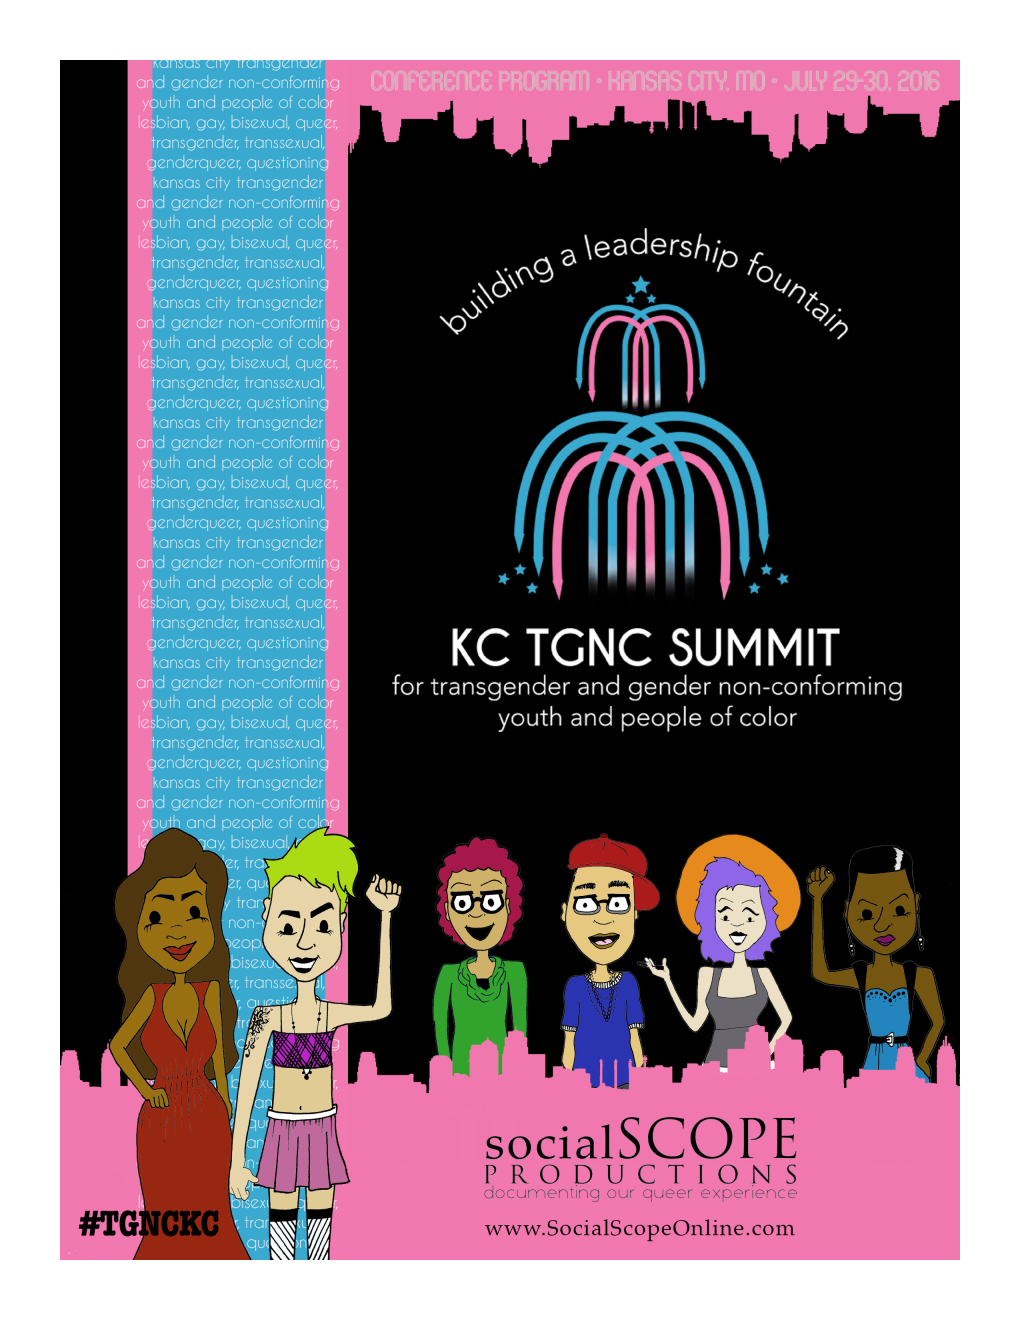 Check out Our Original 2016 Summit Program Here!